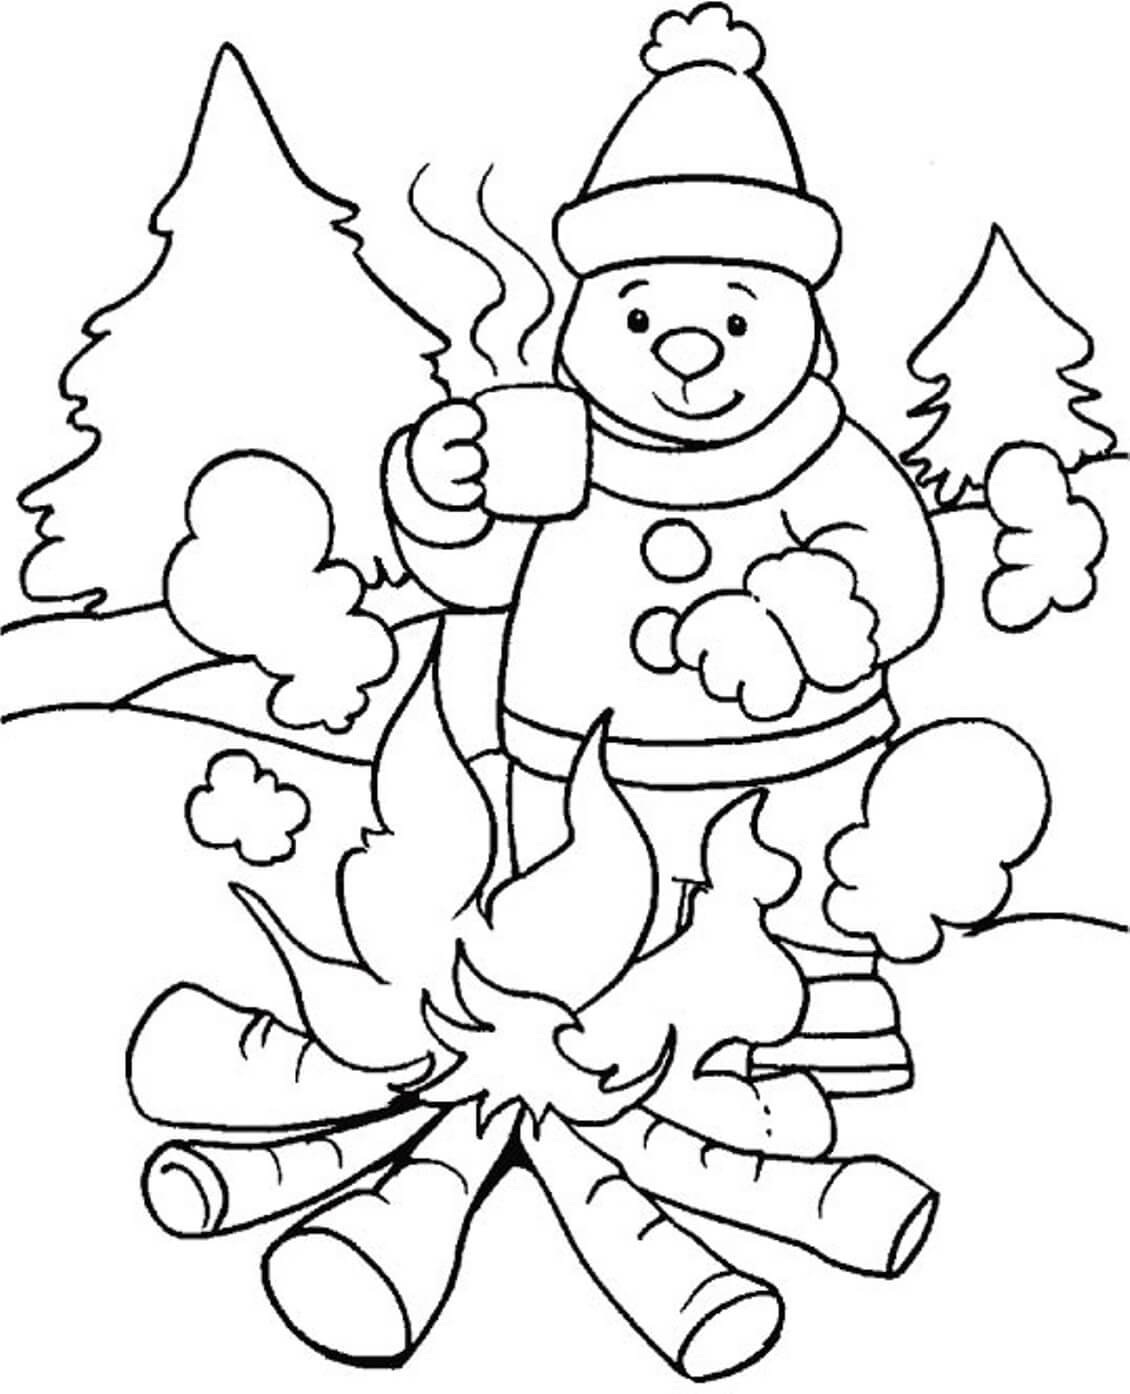 49-winter-scene-coloring-pages-for-adults-png-colorist